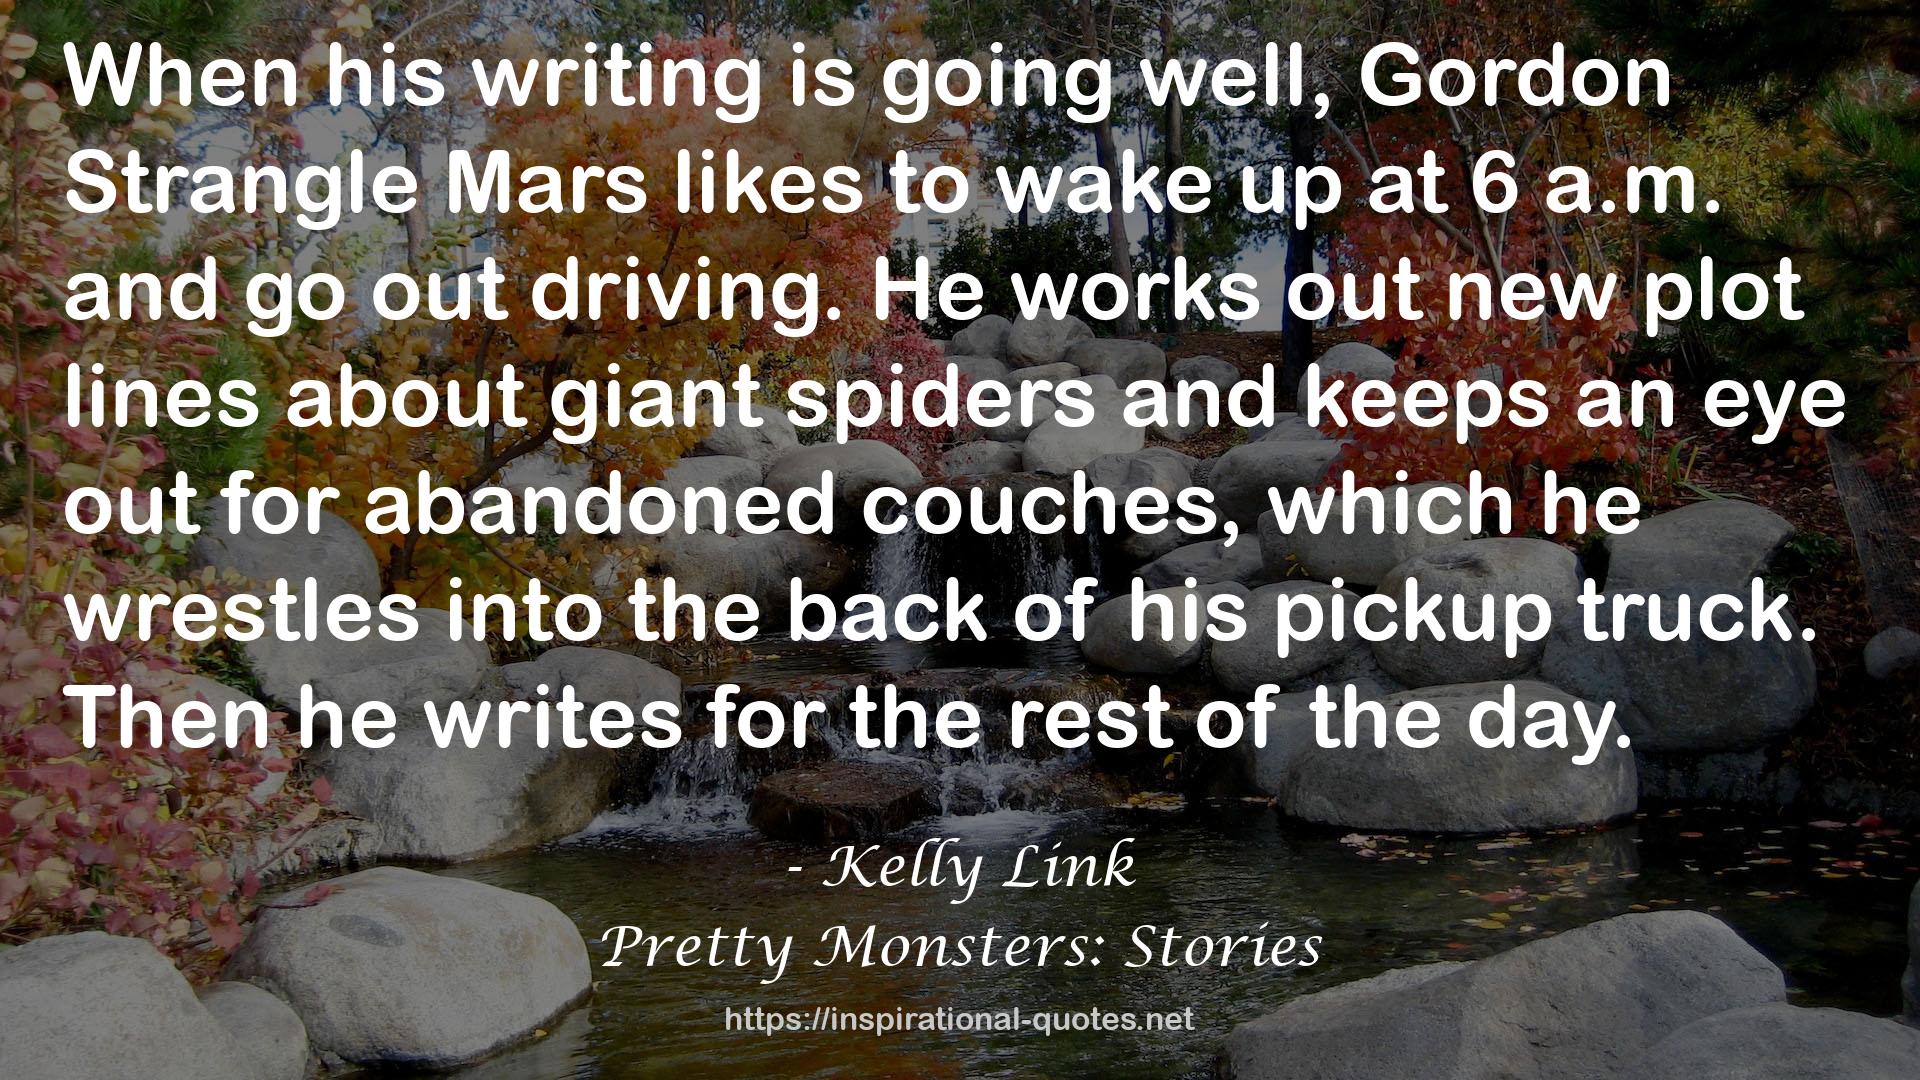 Pretty Monsters: Stories QUOTES